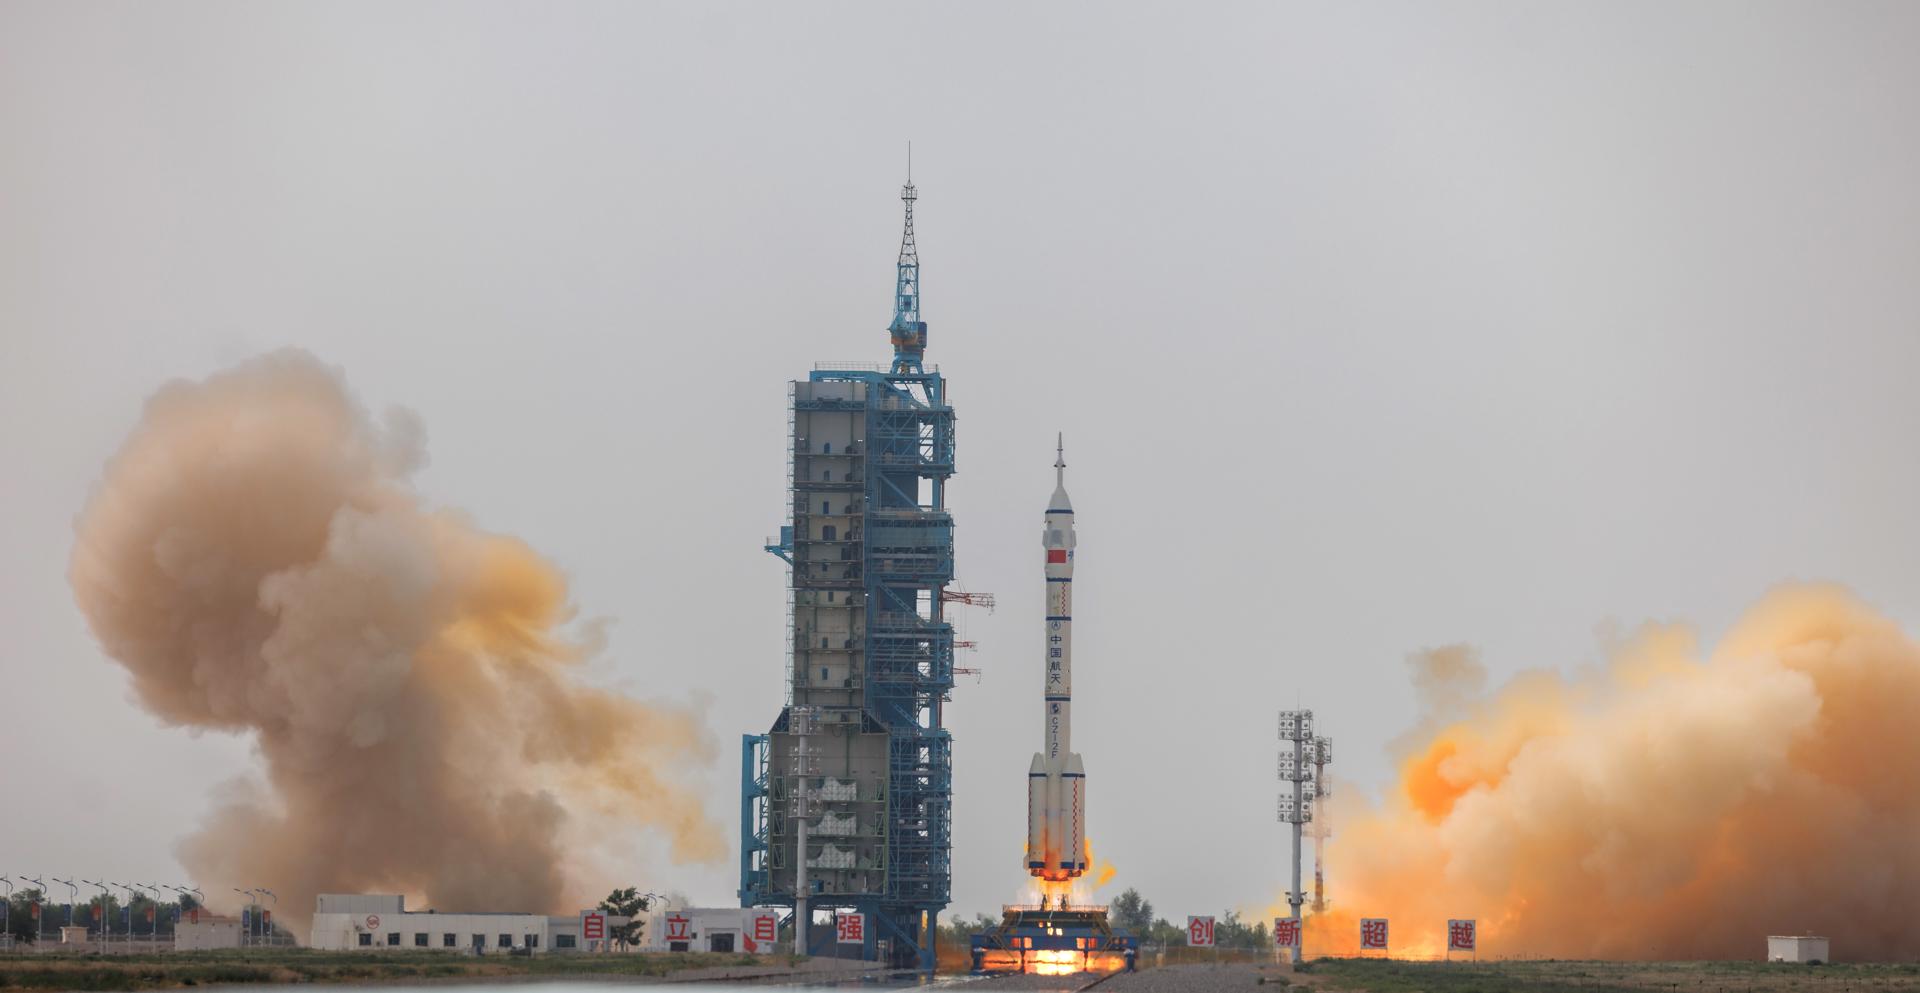 A Long March-2F carrier rocket with a Shenzhou-16 manned space flight lifts off during launch at the Jiuquan Satellite Launch Centre, in Jiuquan, Gansu province, China, 30 May 2023. The Shenzhou-16 manned space flight mission will transport three Chinese astronauts to the Tiangong space station. EFE-EPA/ALEX PLAVEVSKI
